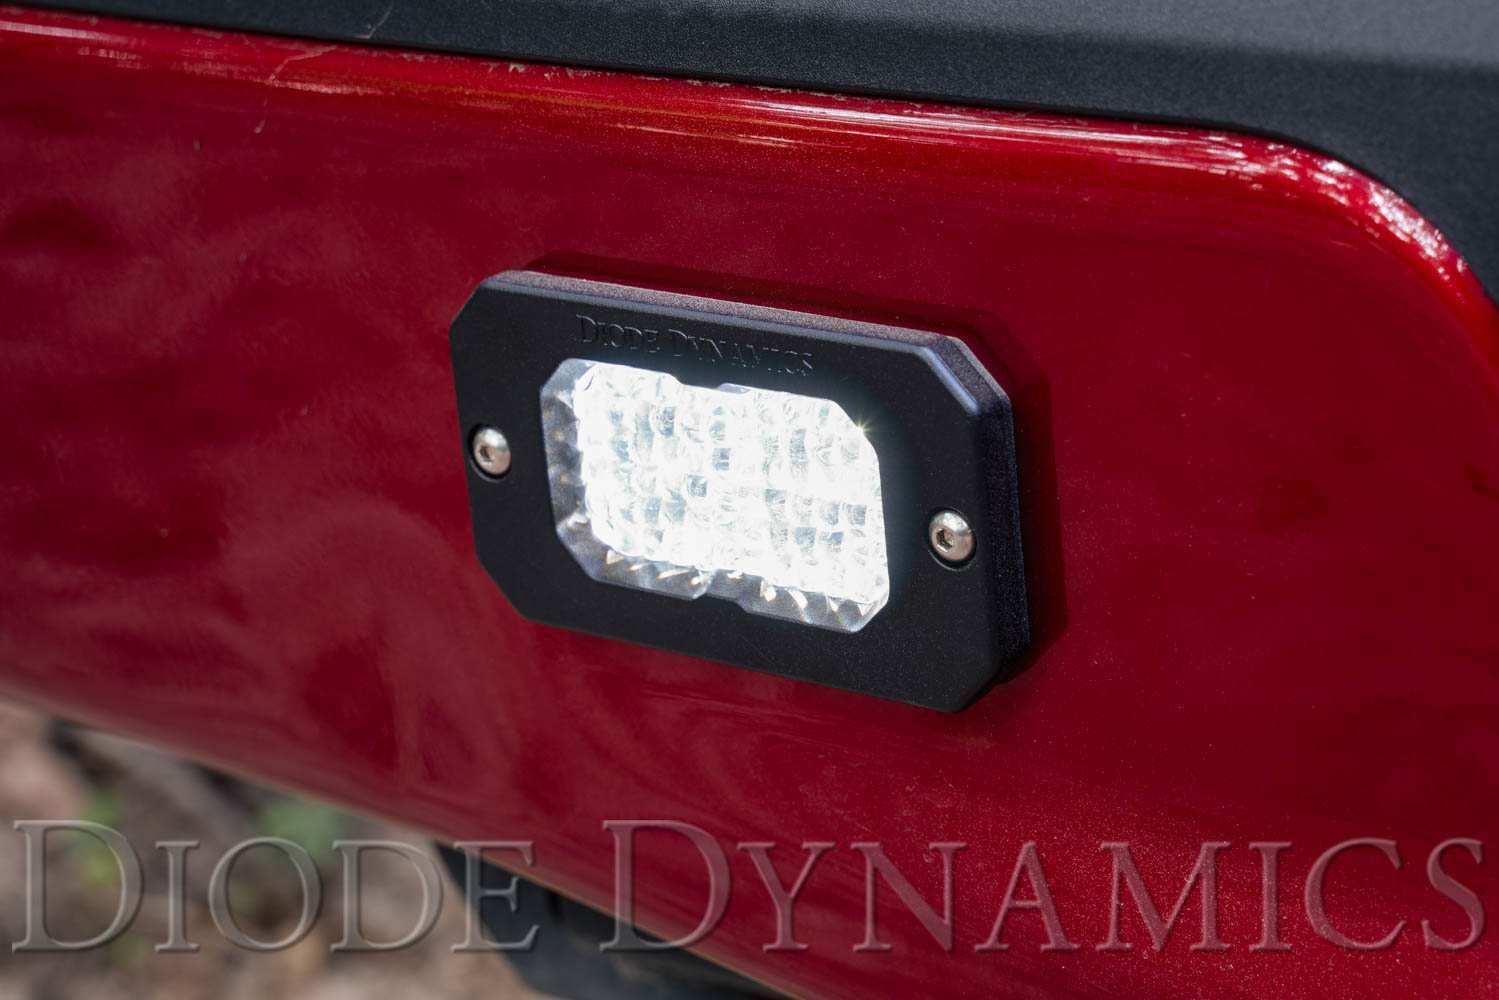 Diode Dynamics Stage Series 2 Inch LED Pod, Pro White Flood Flush ABL Each - Click Image to Close